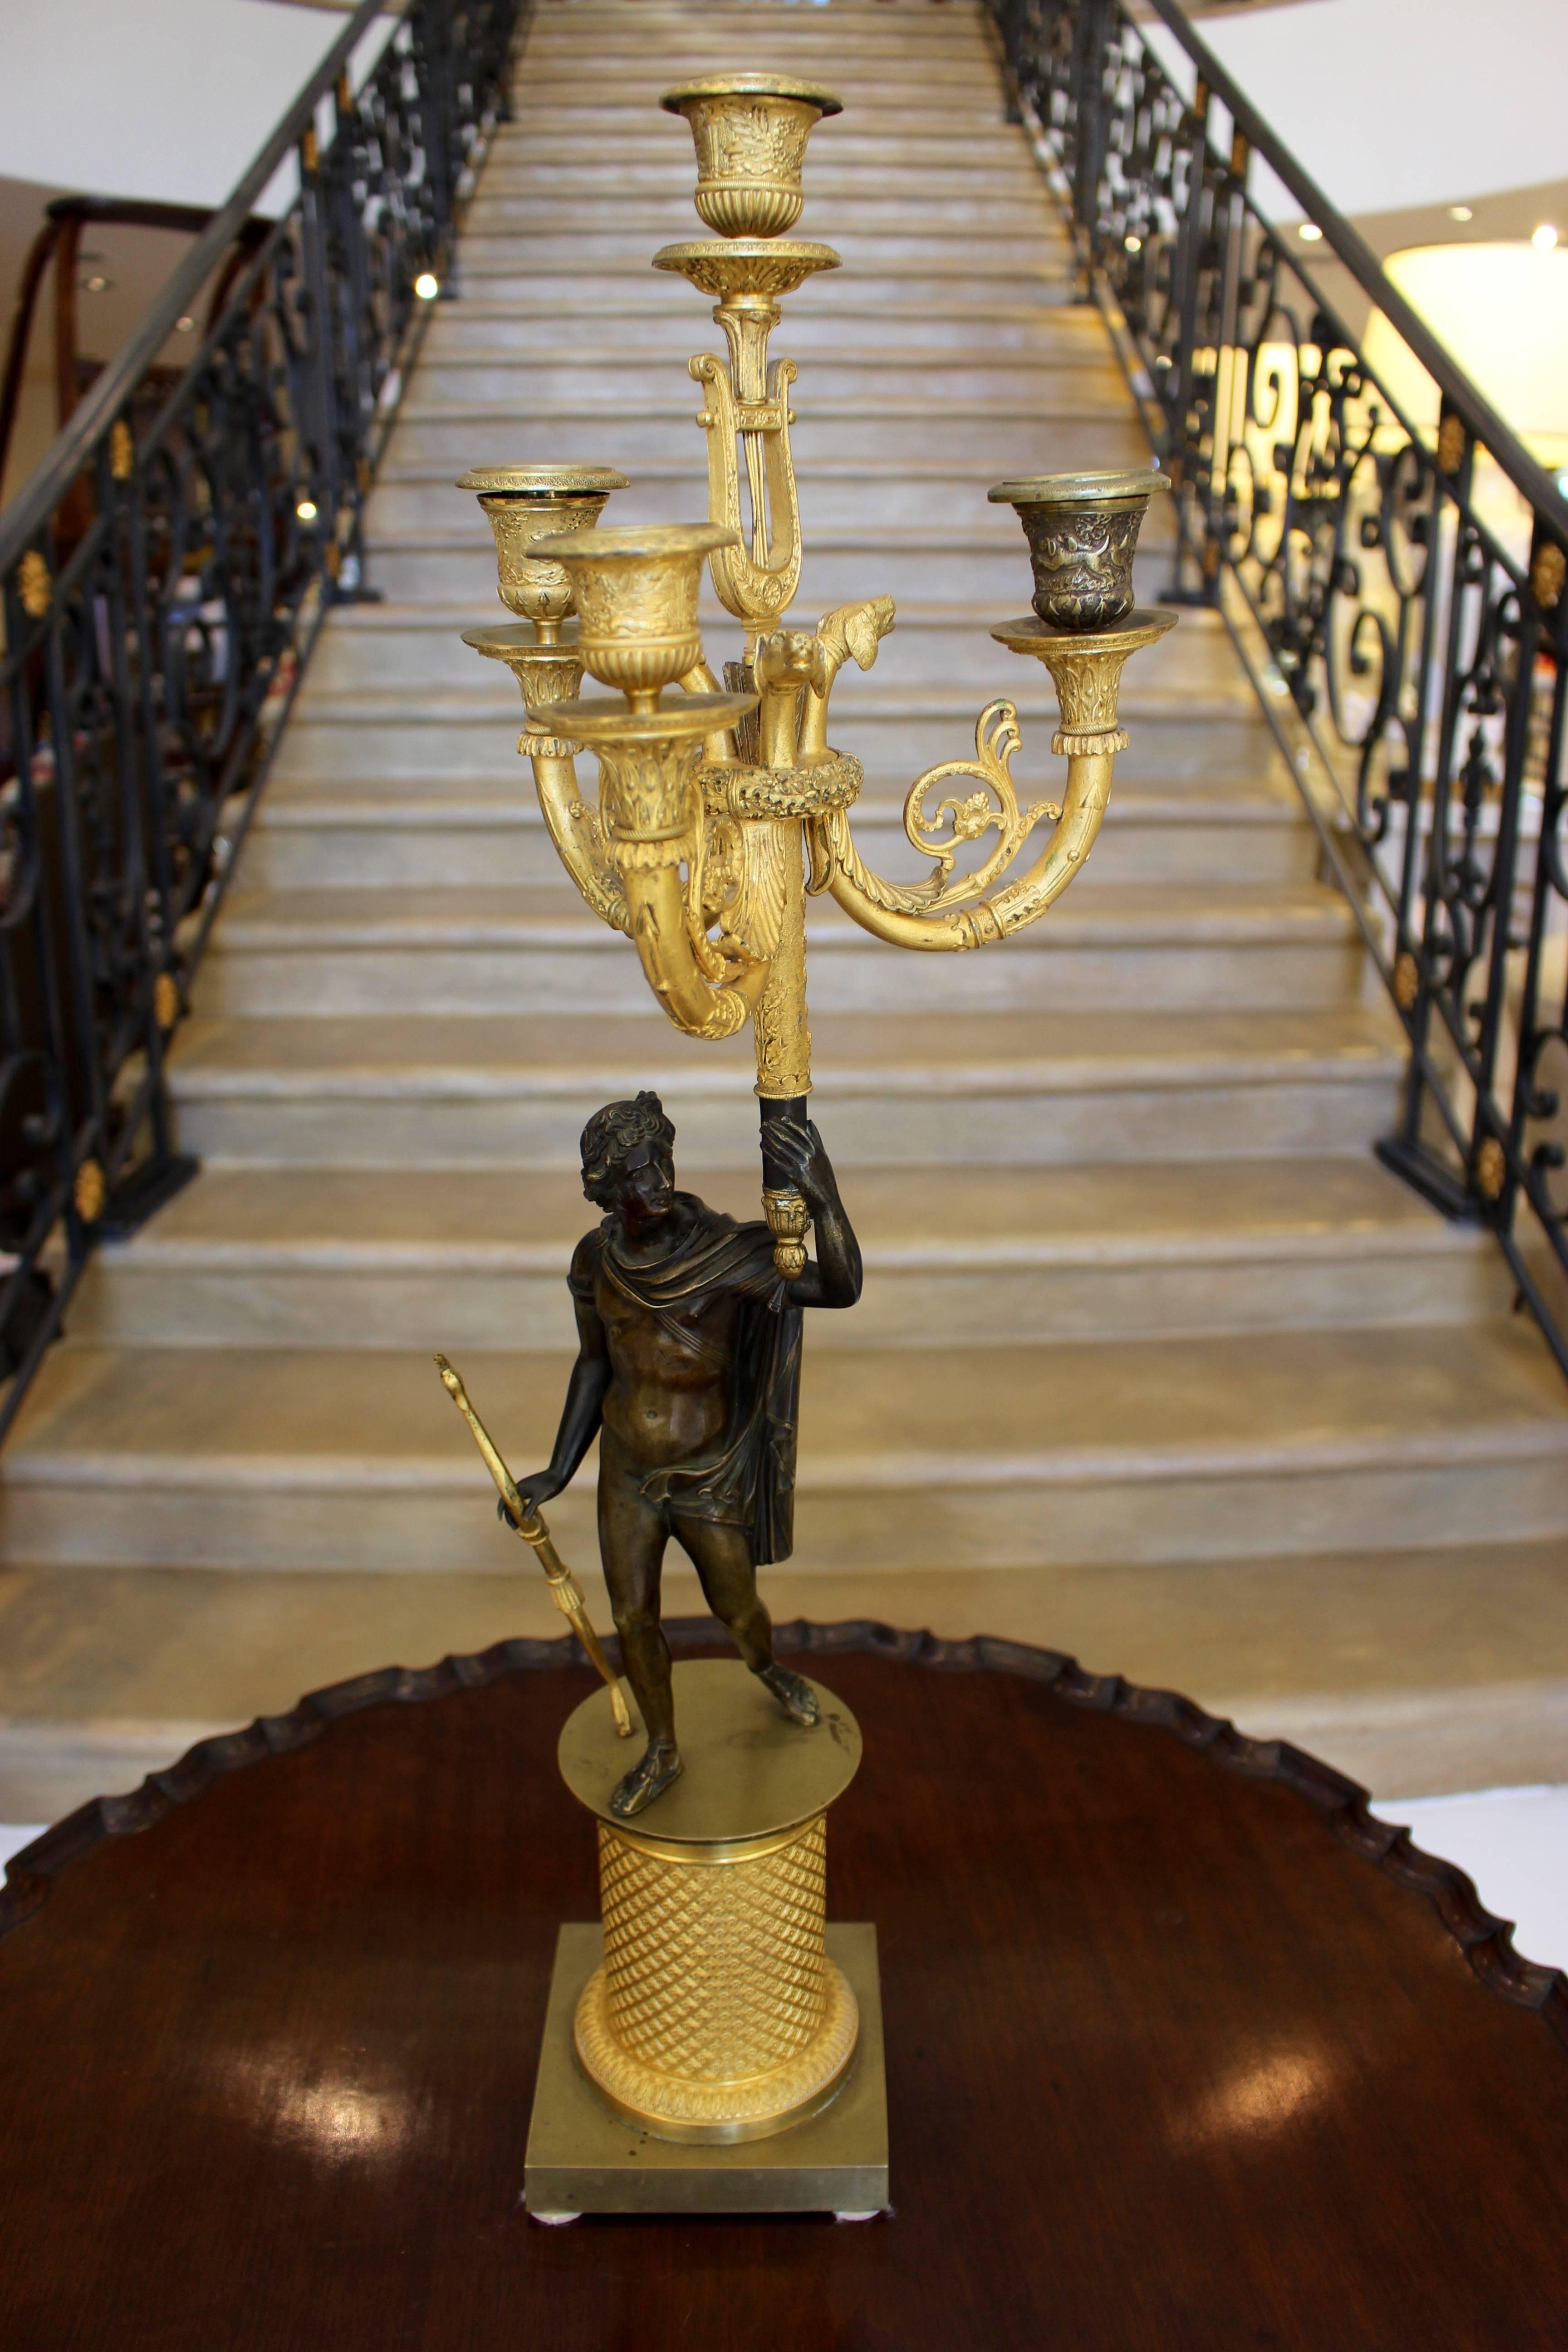 A pair of French Charles X period ormolu and painted bronze four-light candelabra from the early 19th century with sculptures of the Olympian gods Apollo, god of music and Diana, goddess of hunting. Modeled after the famous antique Roman sculptures